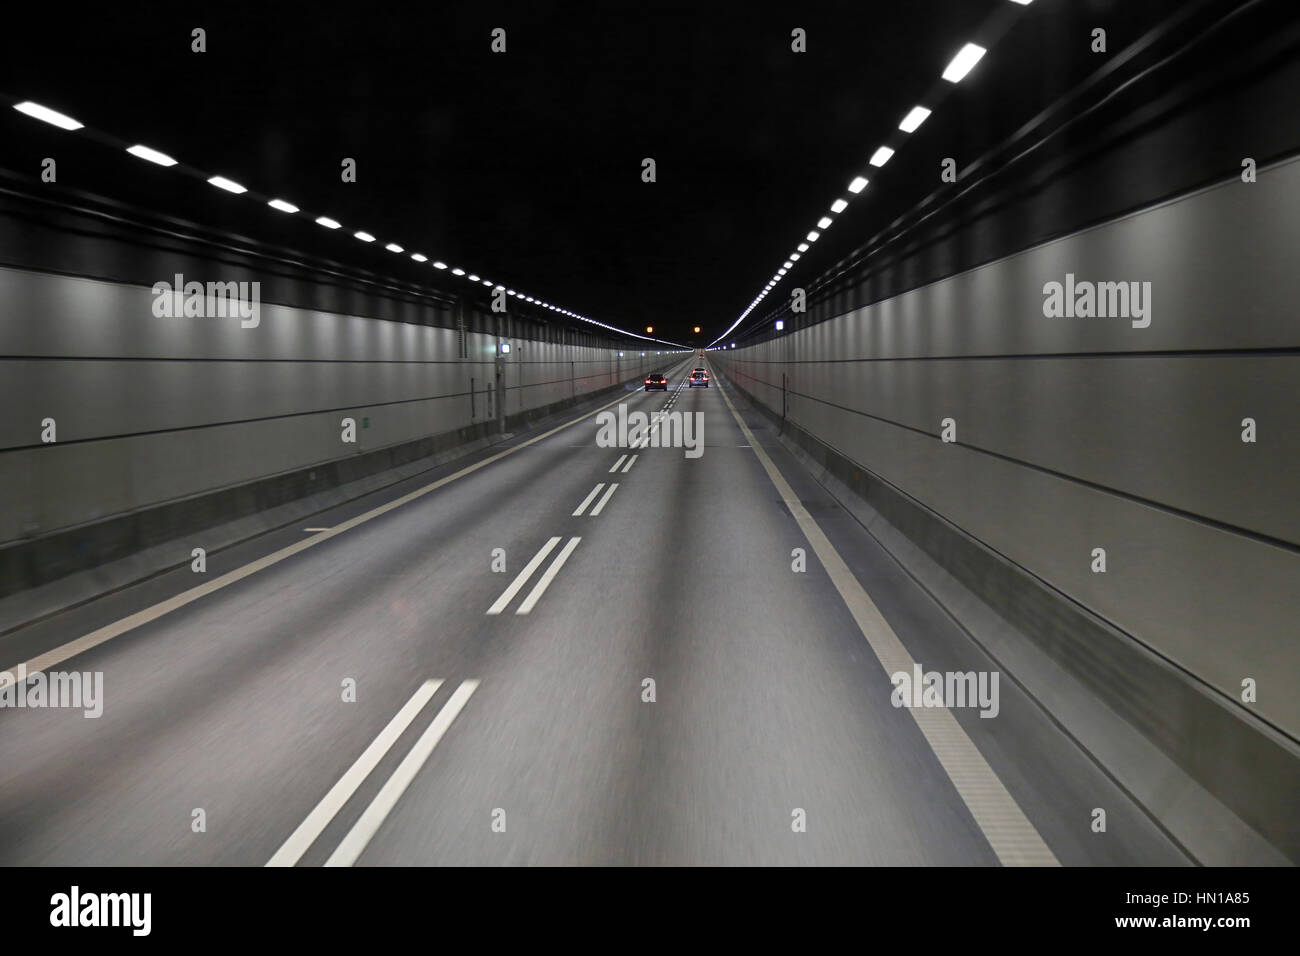 Cars in a tunnel on Oresund bridge between Sweden and Denmark Stock Photo